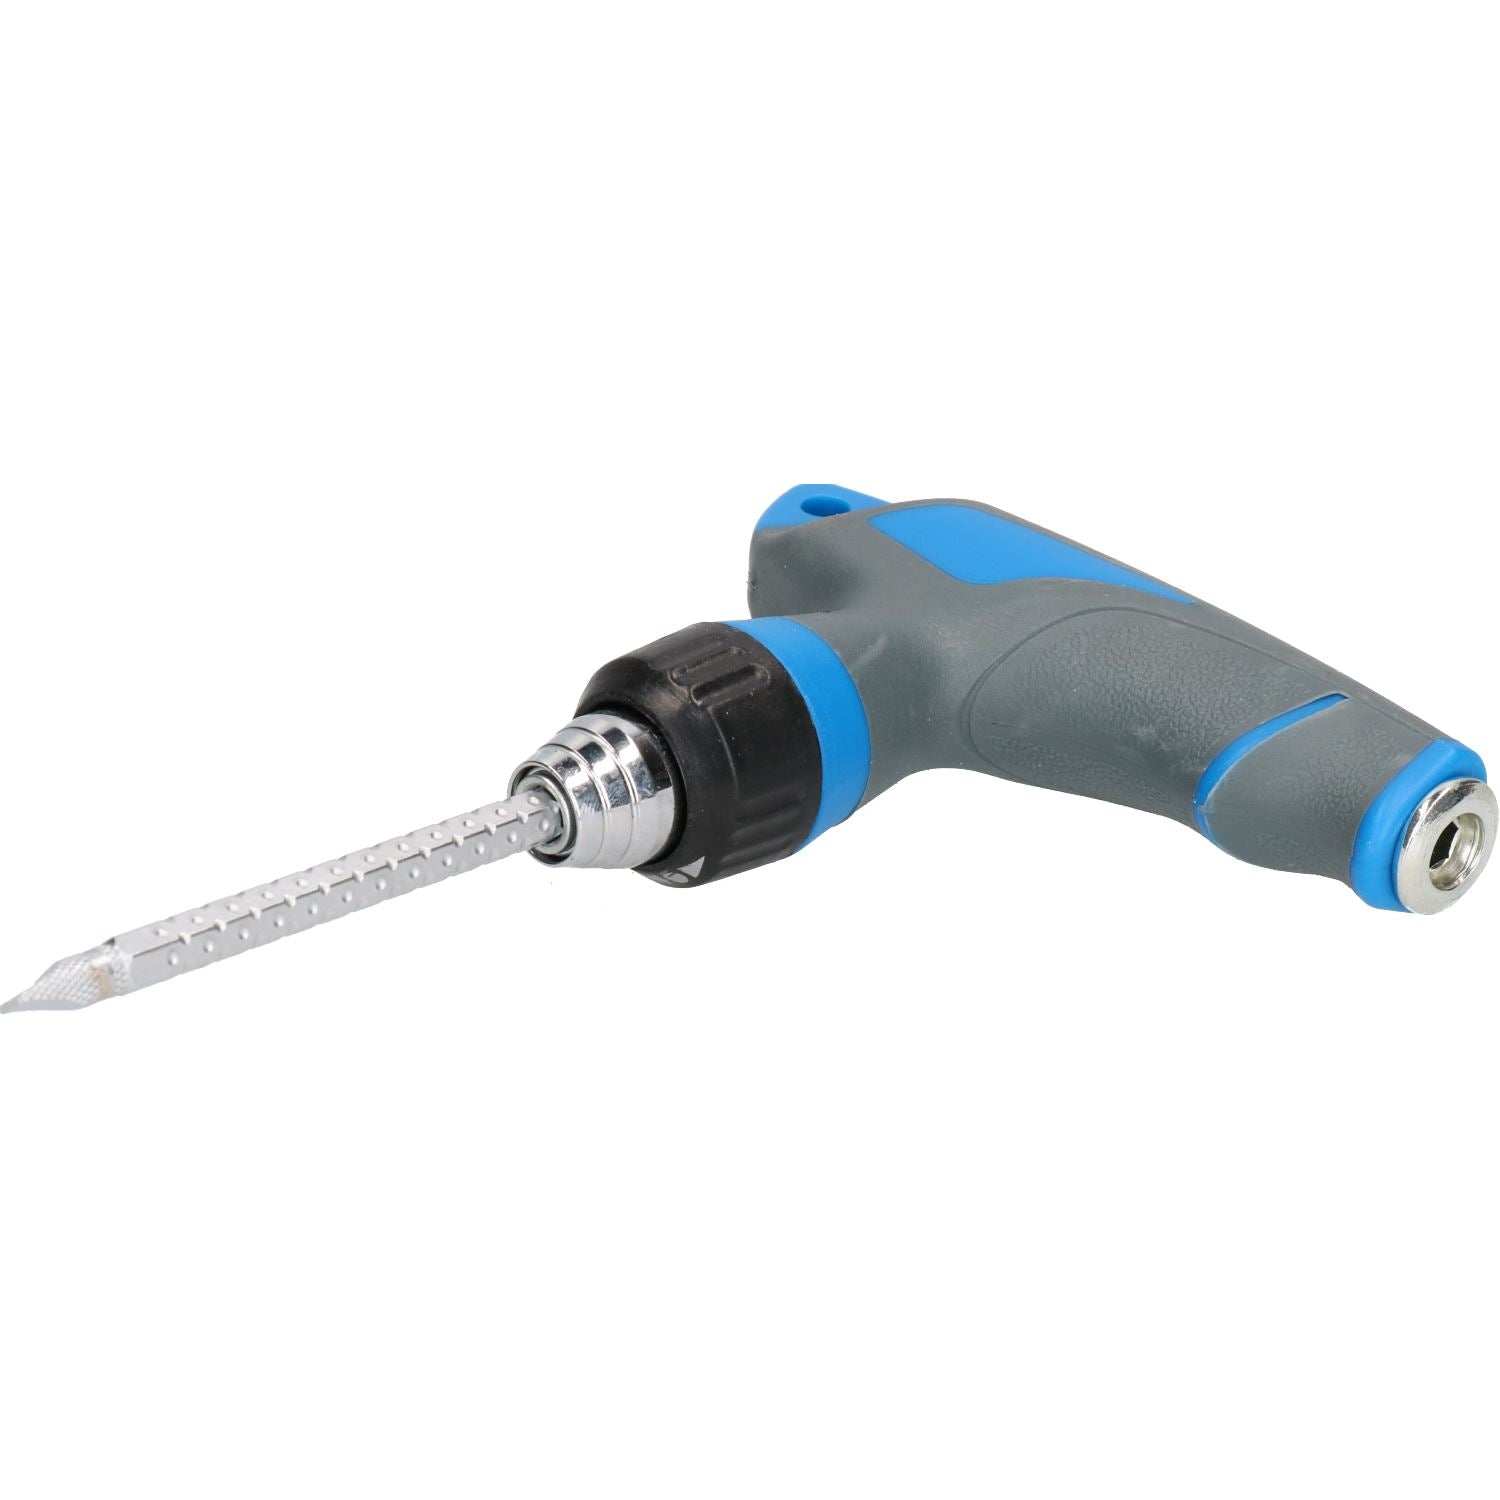 160mm T-Handle Ratchet Screwdriver 2-Way 6mm Slotted PH2 Lock Function